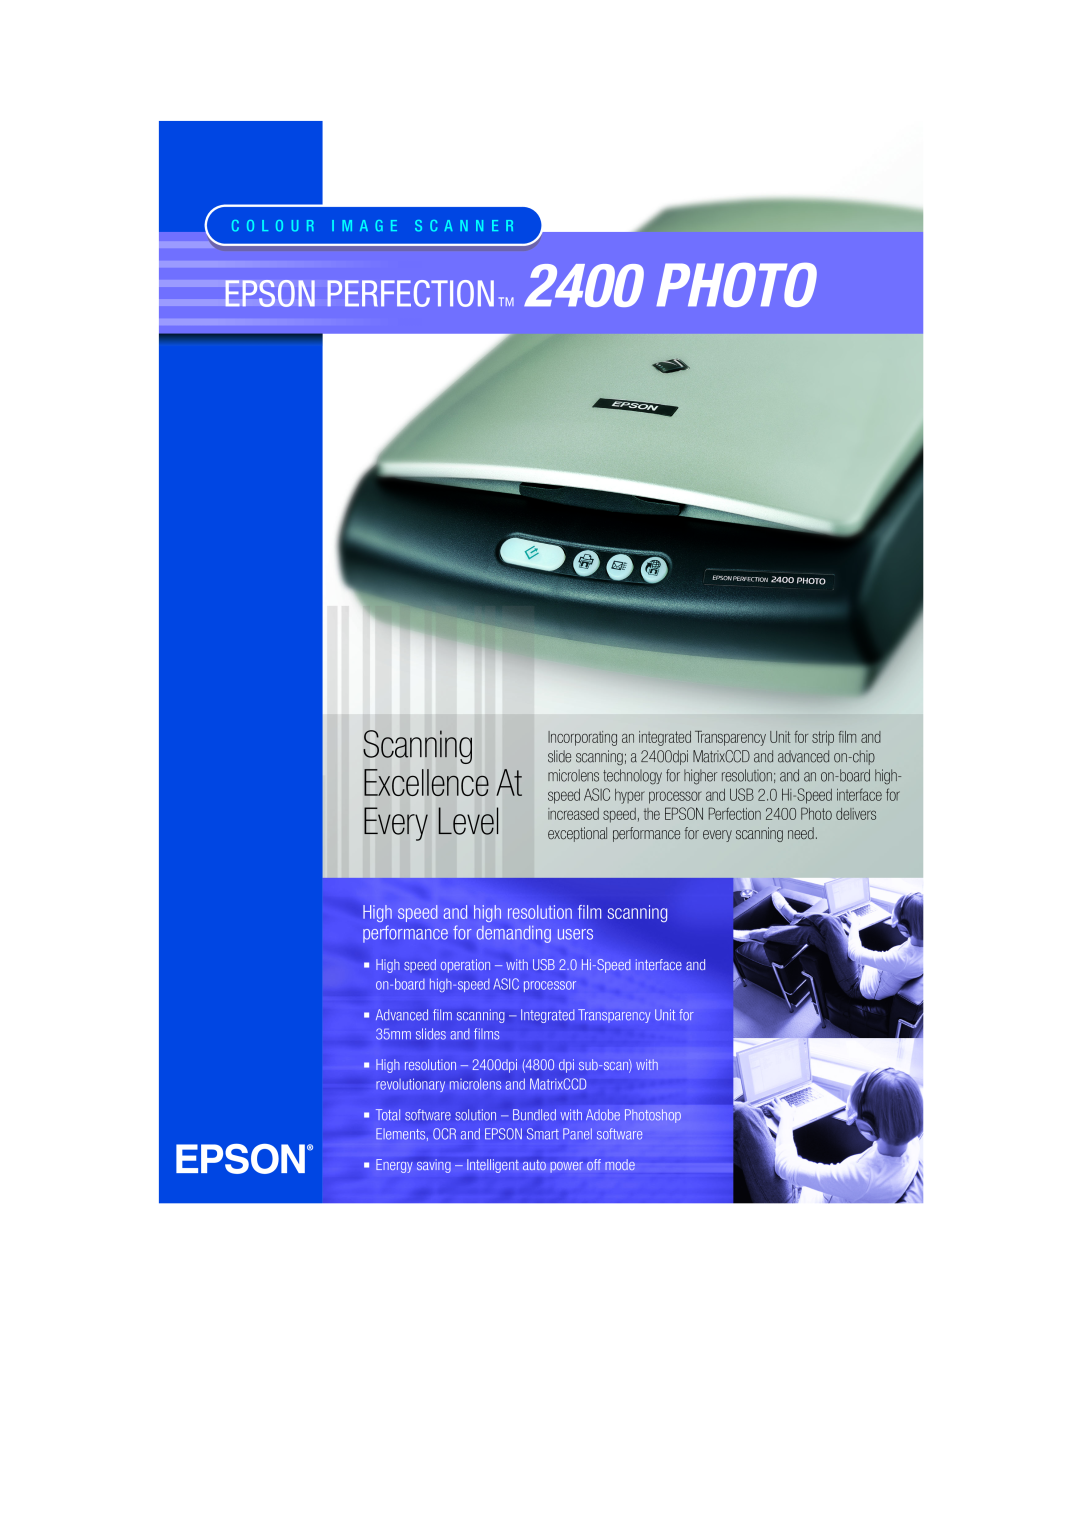 Epson 2400 Photo manual Scanning Excellence At, Every Level, Epson Perfection, C O L O U R I M A G E S C A N N E R 